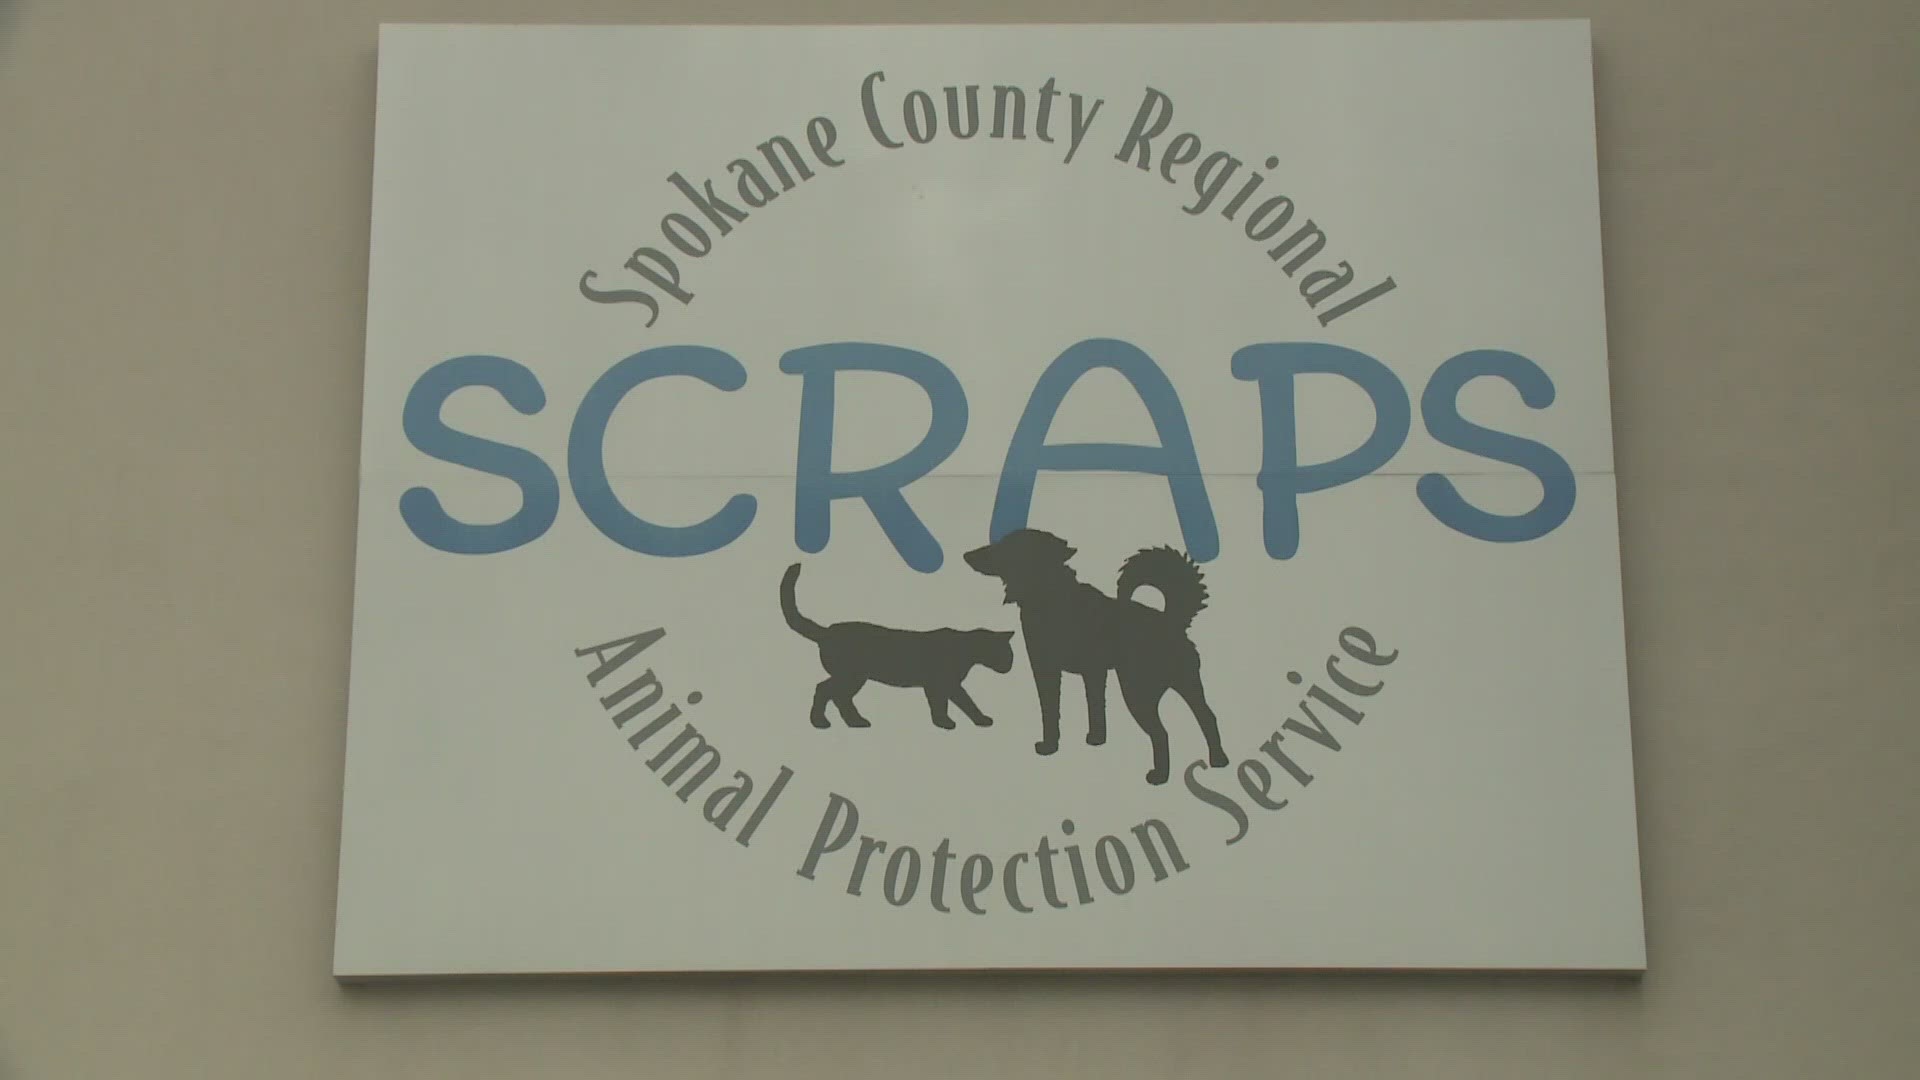 Euthanasia at SCRAPS is now only permitted for impounded dogs and cats when a veterinarian determines the animal is severely injured, sick, diseased or suffering.